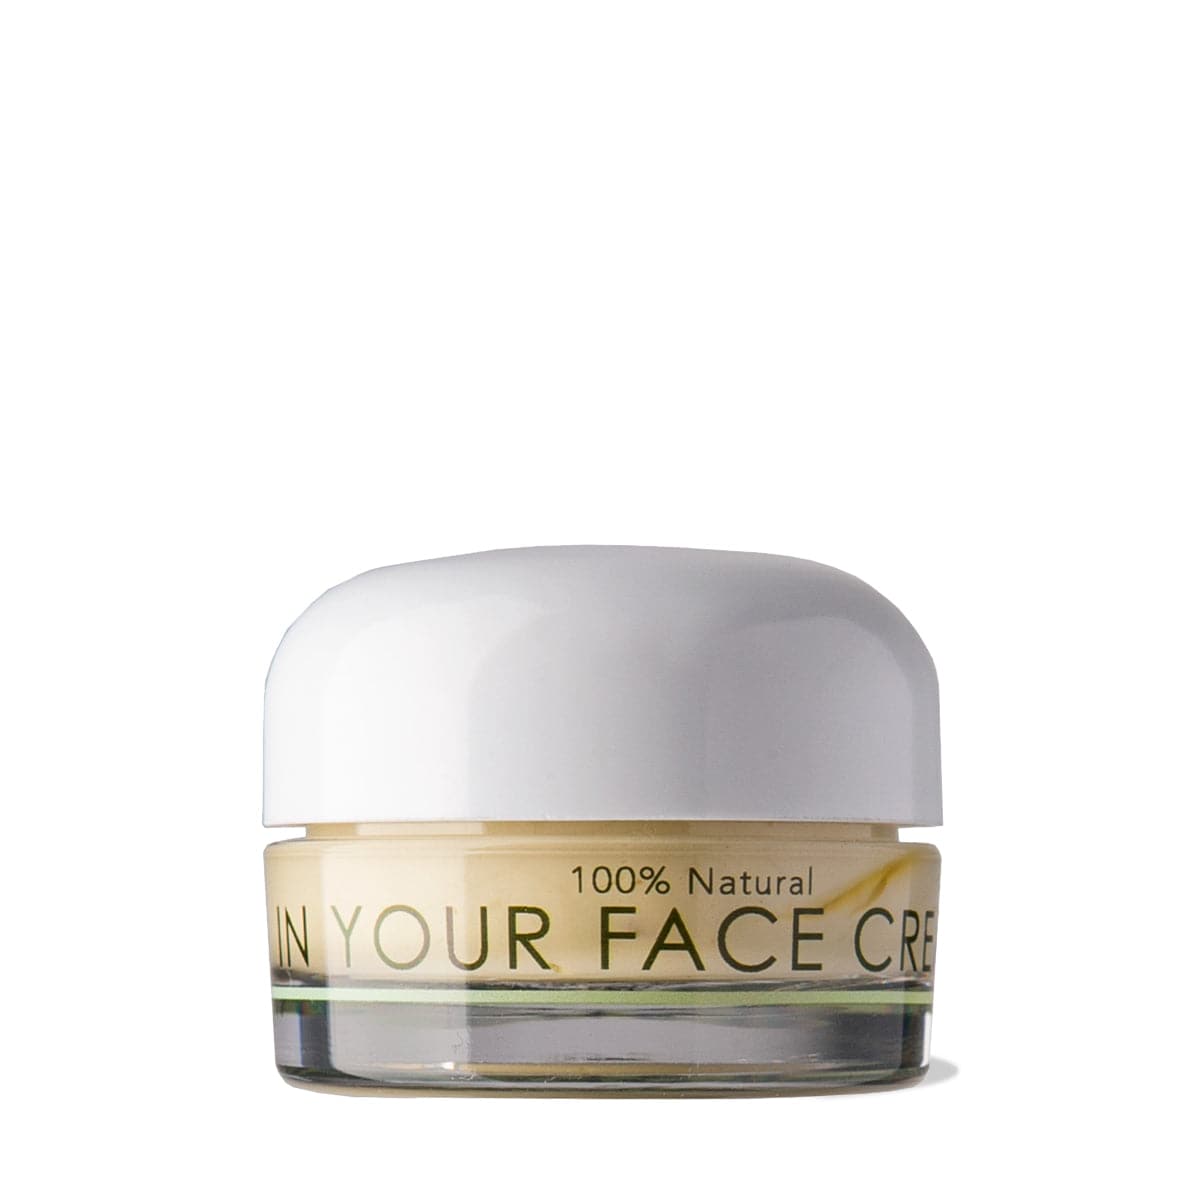 a photo of the IN YOUR FACE CREAM - MINI (TRAVEL SIZE) on a white background. It says "100% natural" on it.